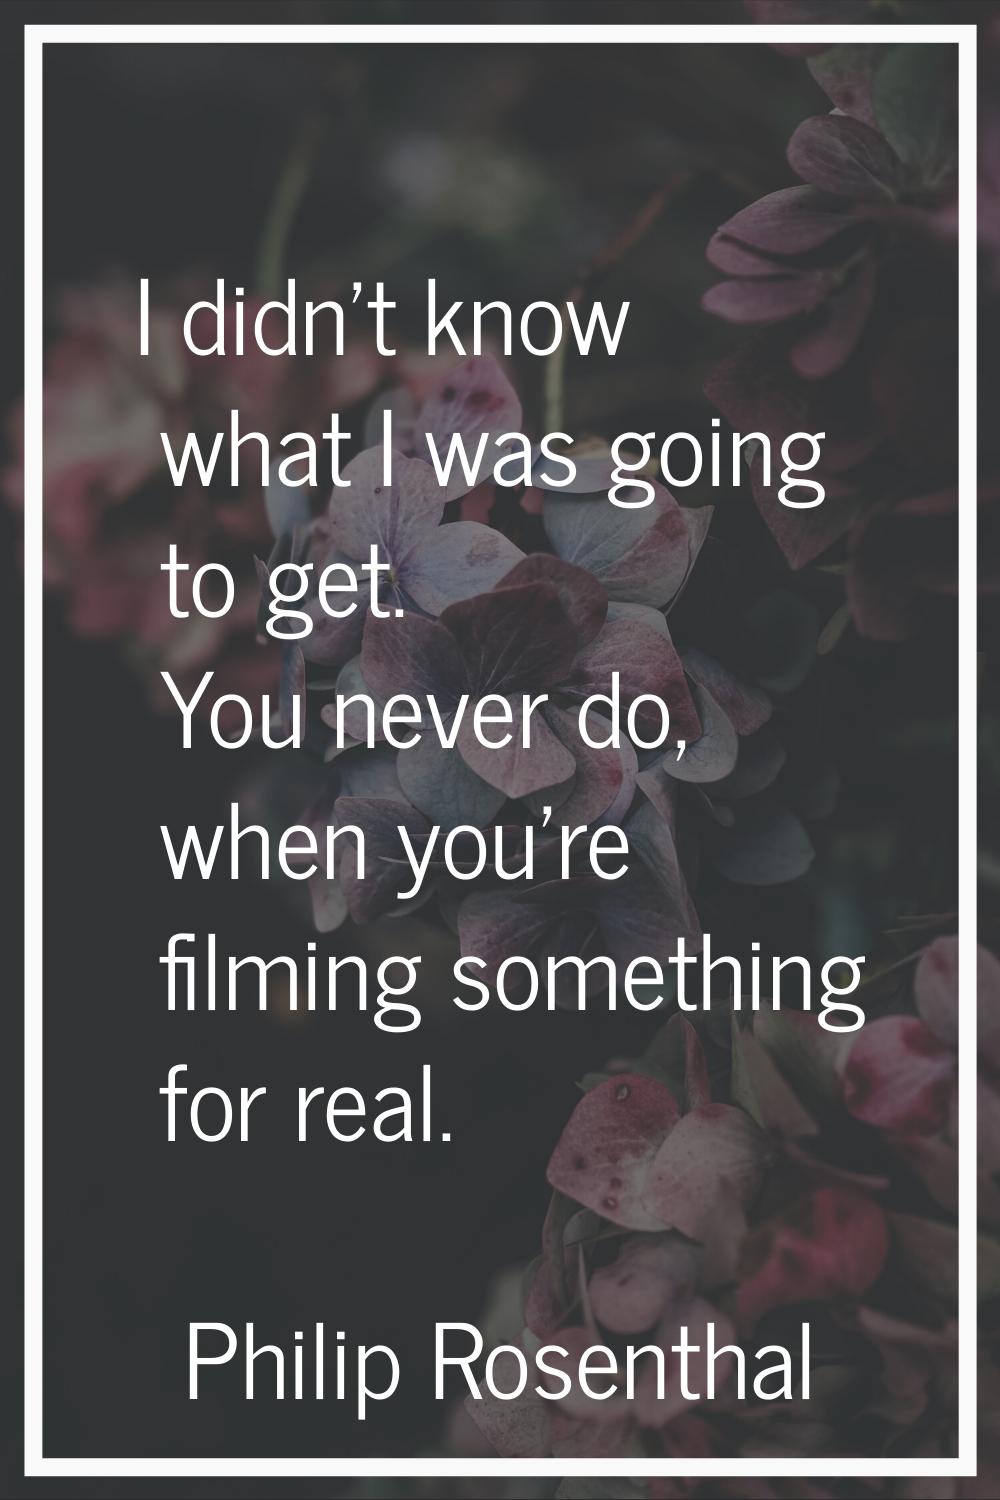 I didn't know what I was going to get. You never do, when you're filming something for real.